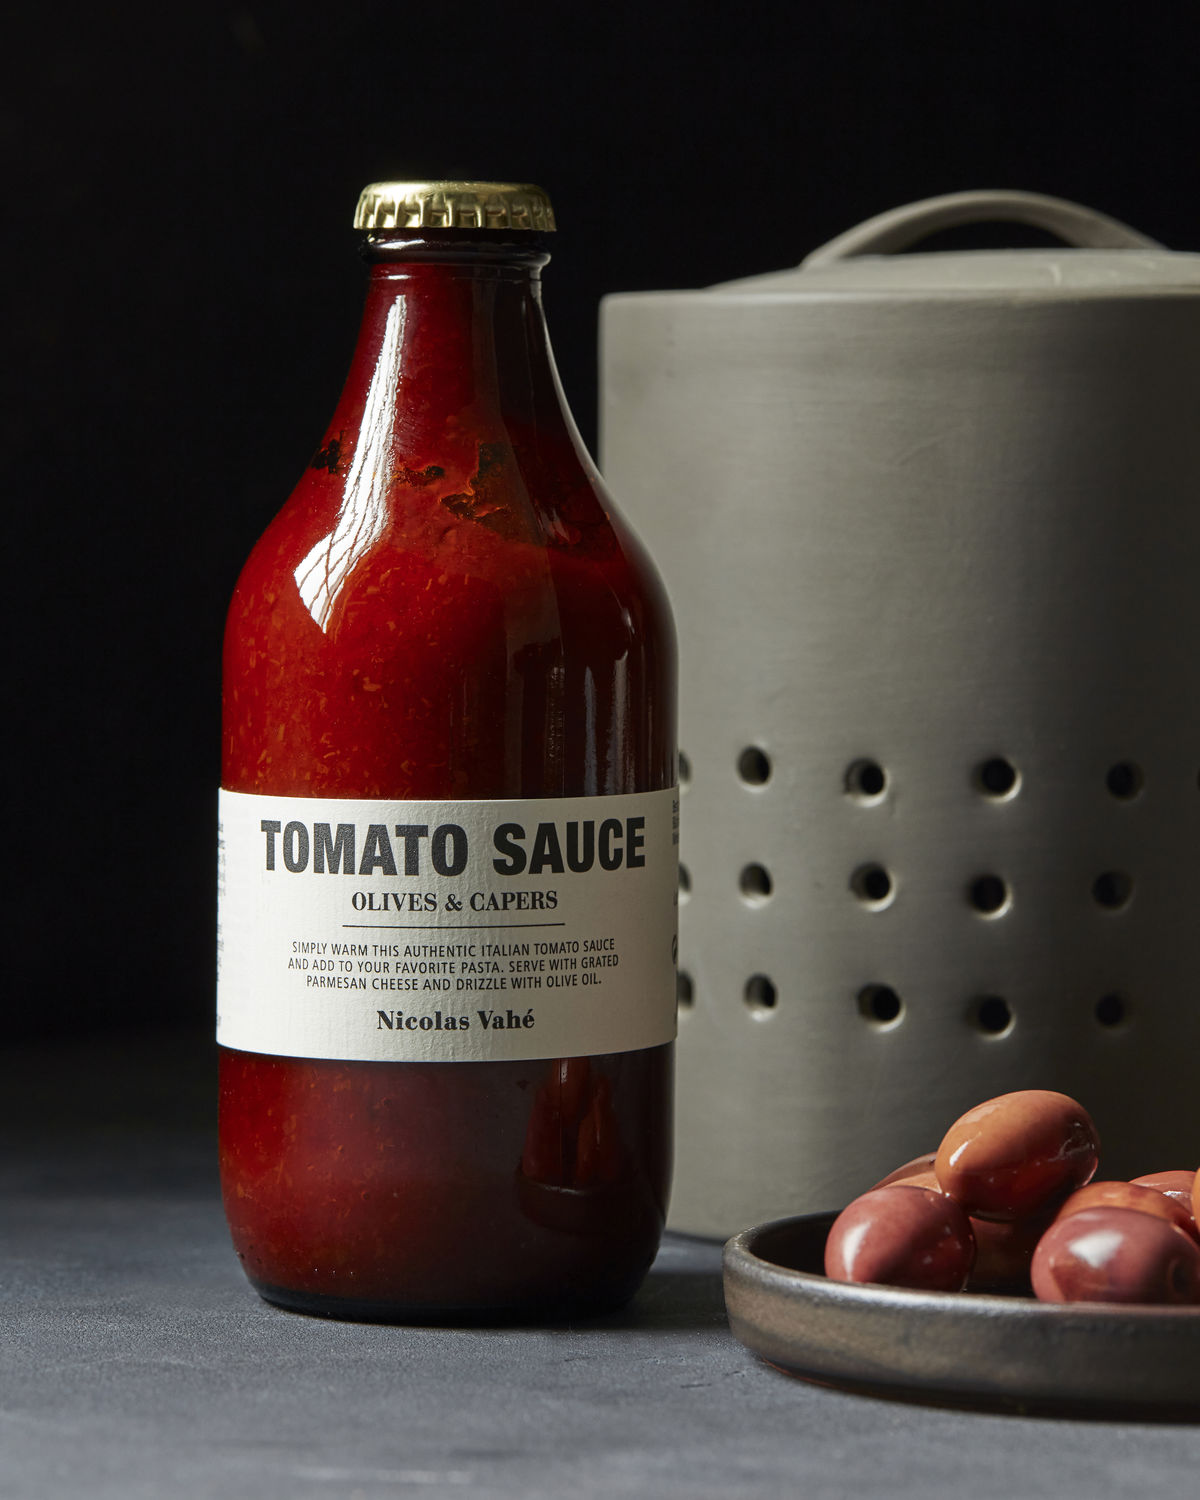 Tomato Sauce, Olives & Capers, 330 ml